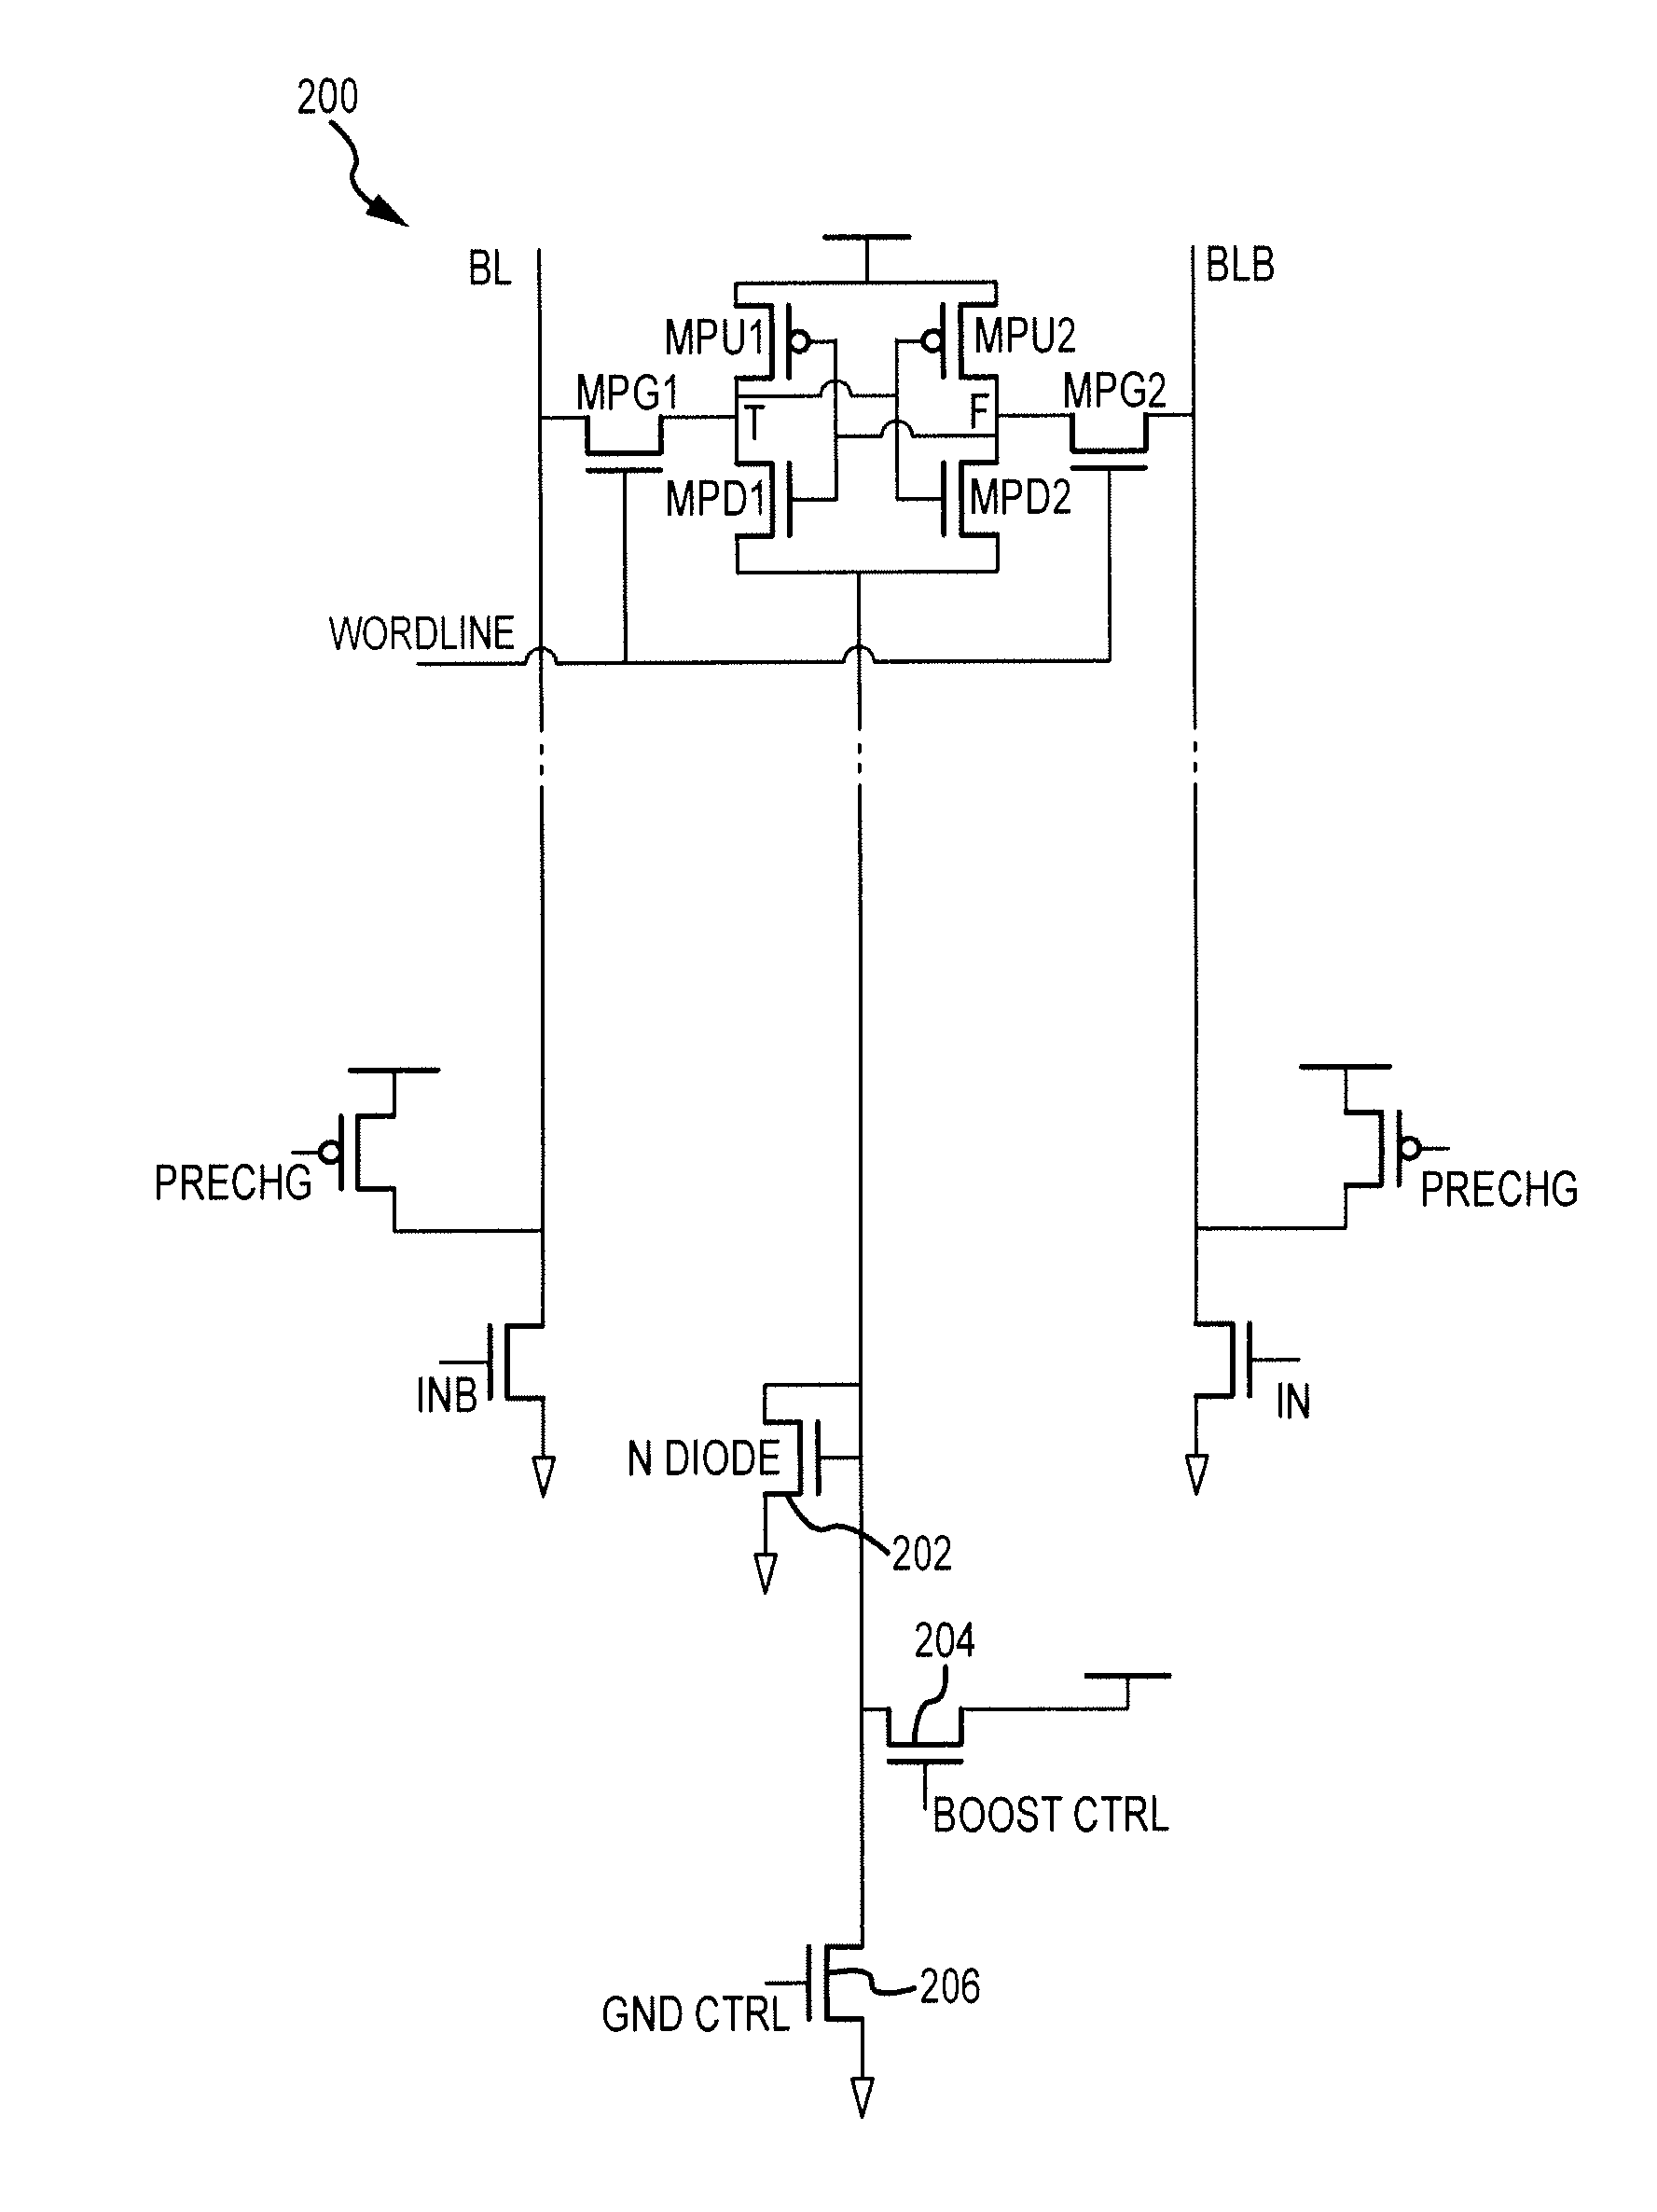 Self-timed write boost for SRAM cell with self mode control